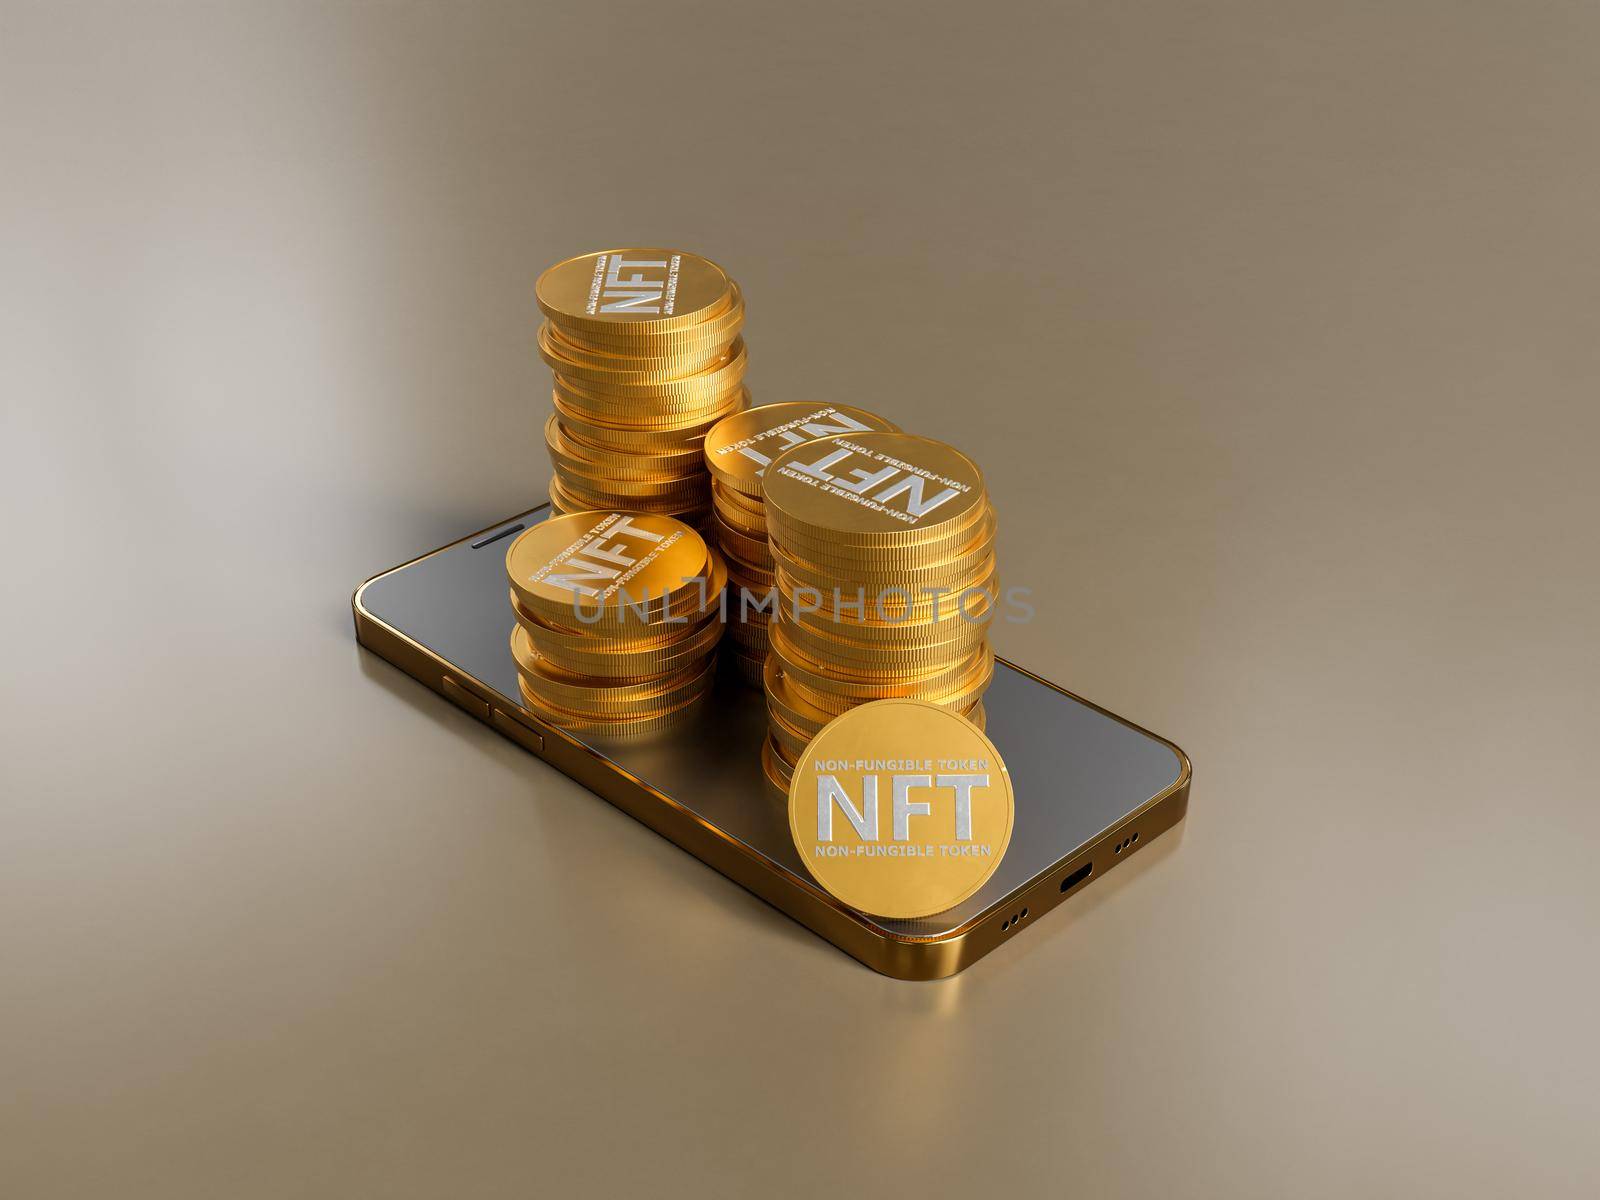 NFT coins on mobile phone screen by asolano